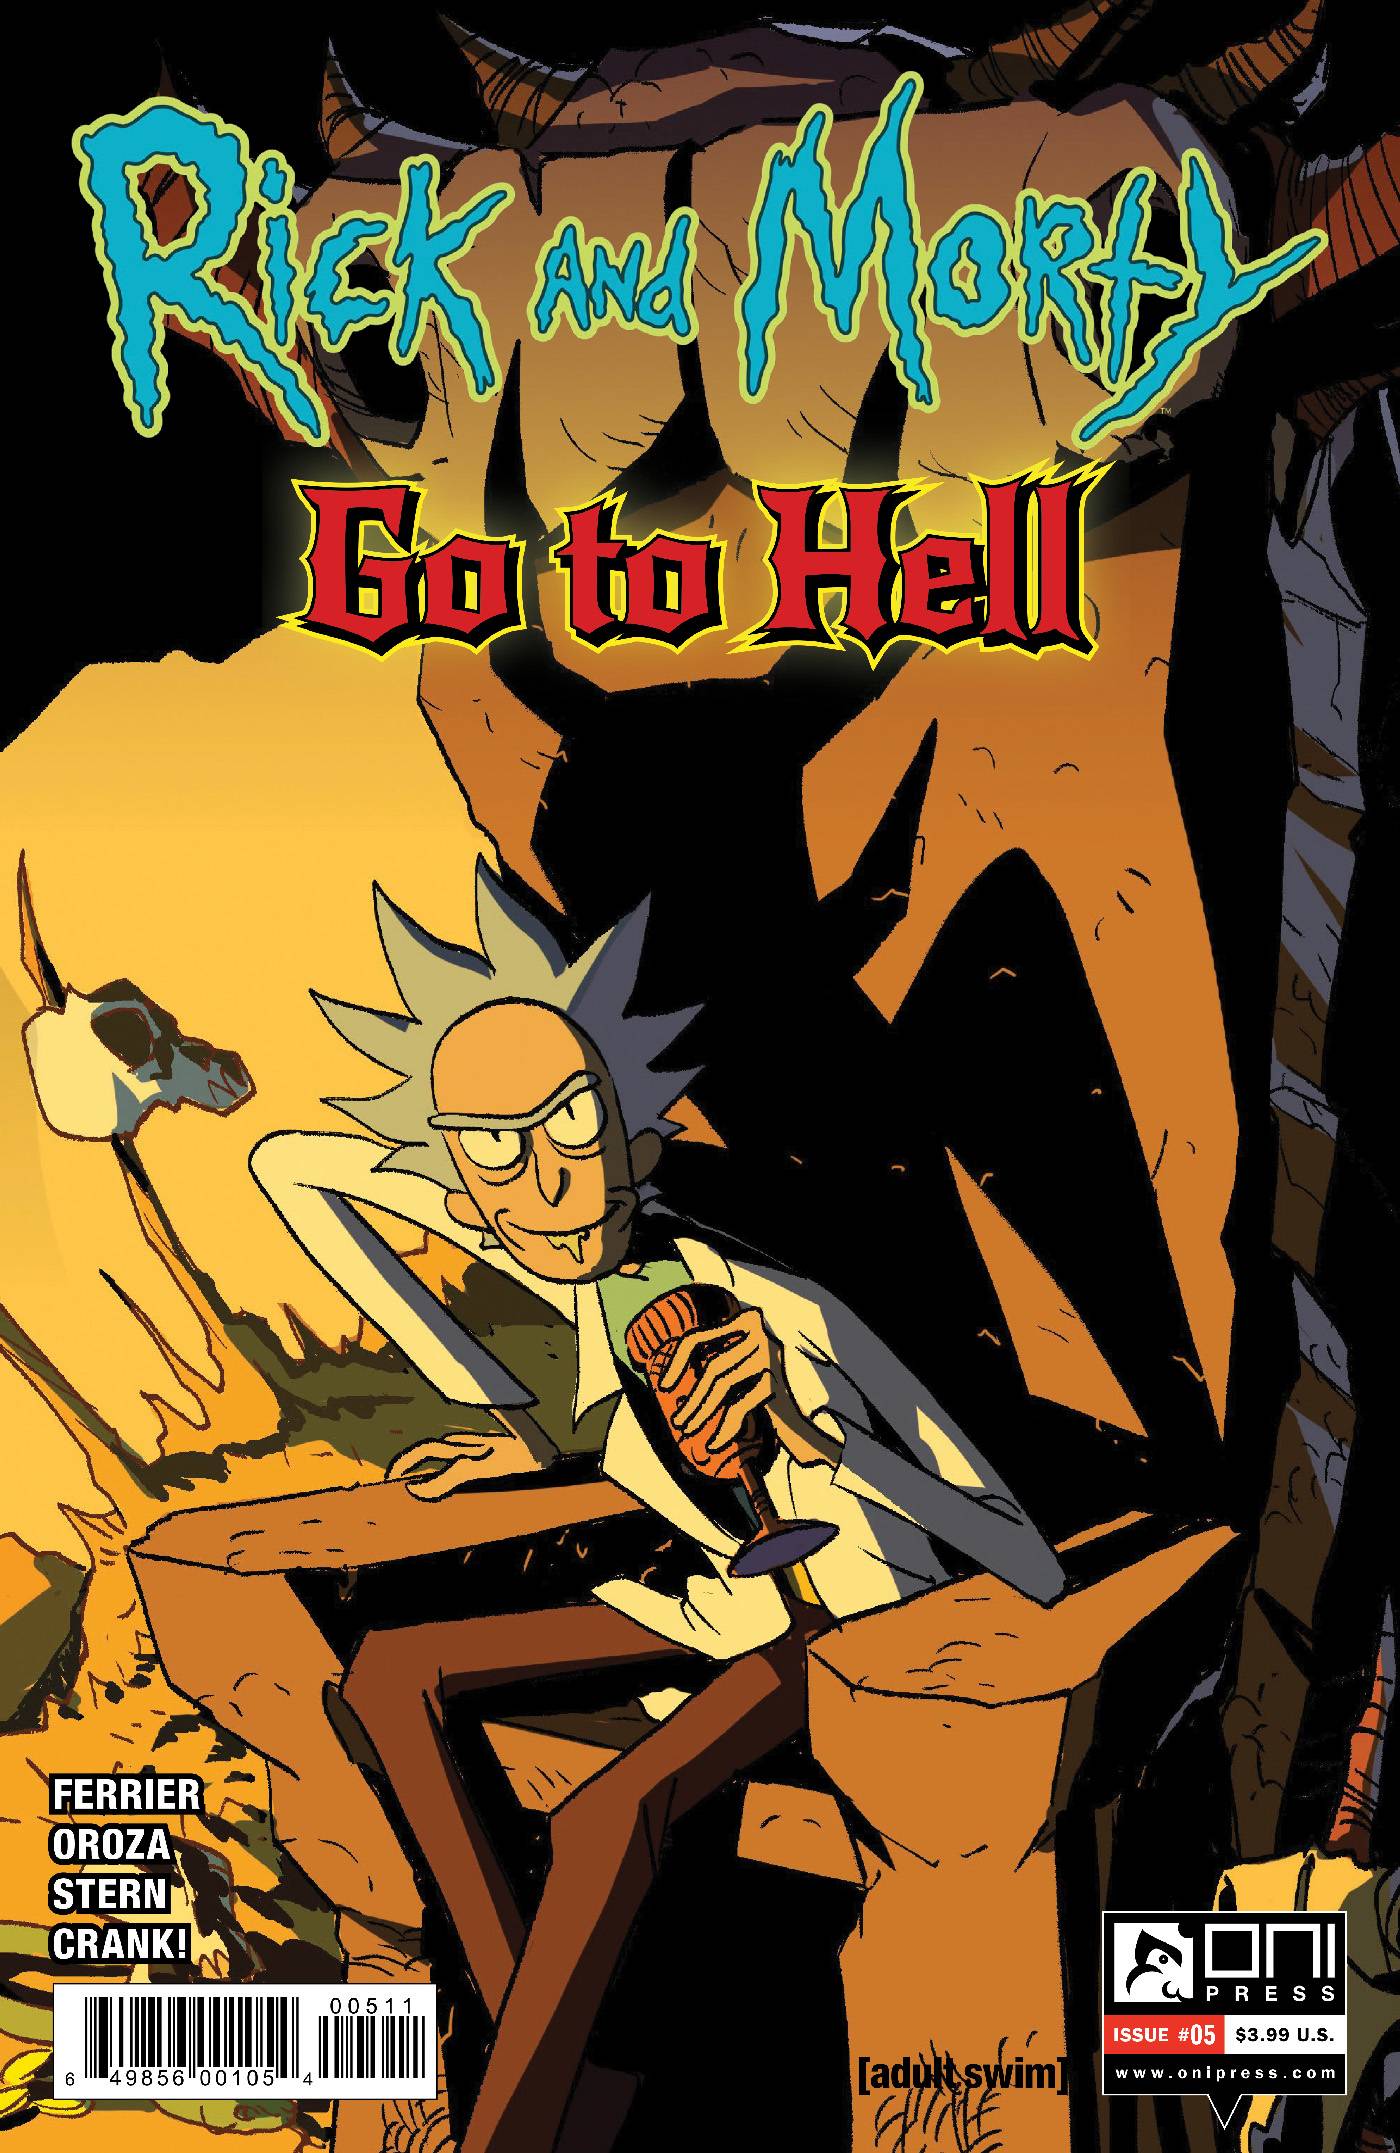 AUG201483 - RICK AND MORTY GO TO HELL #5 CVR A - Previews World